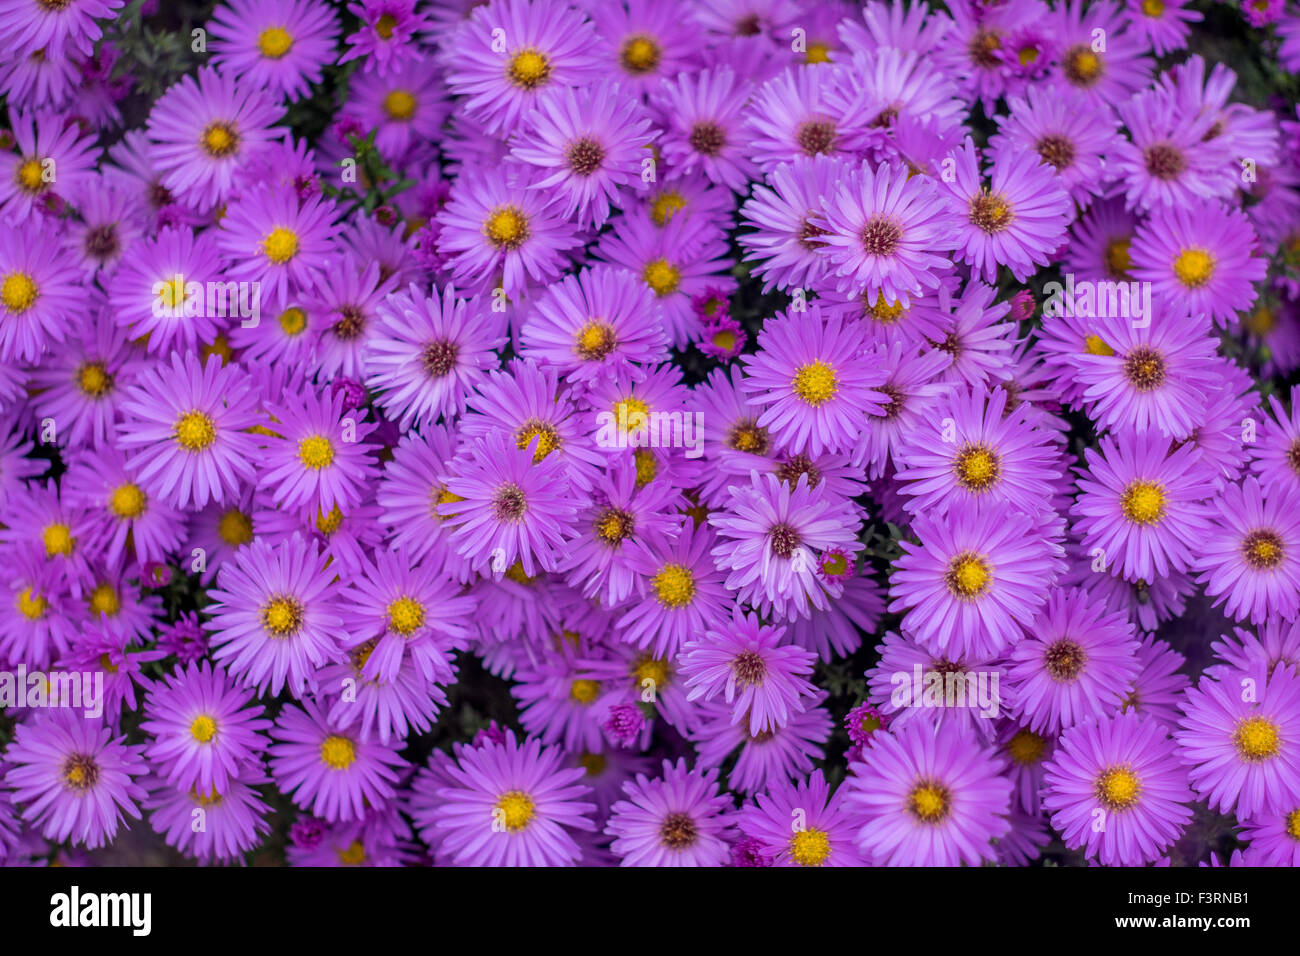 Lots of purple autumn aster flowers in full bloom Stock Photo